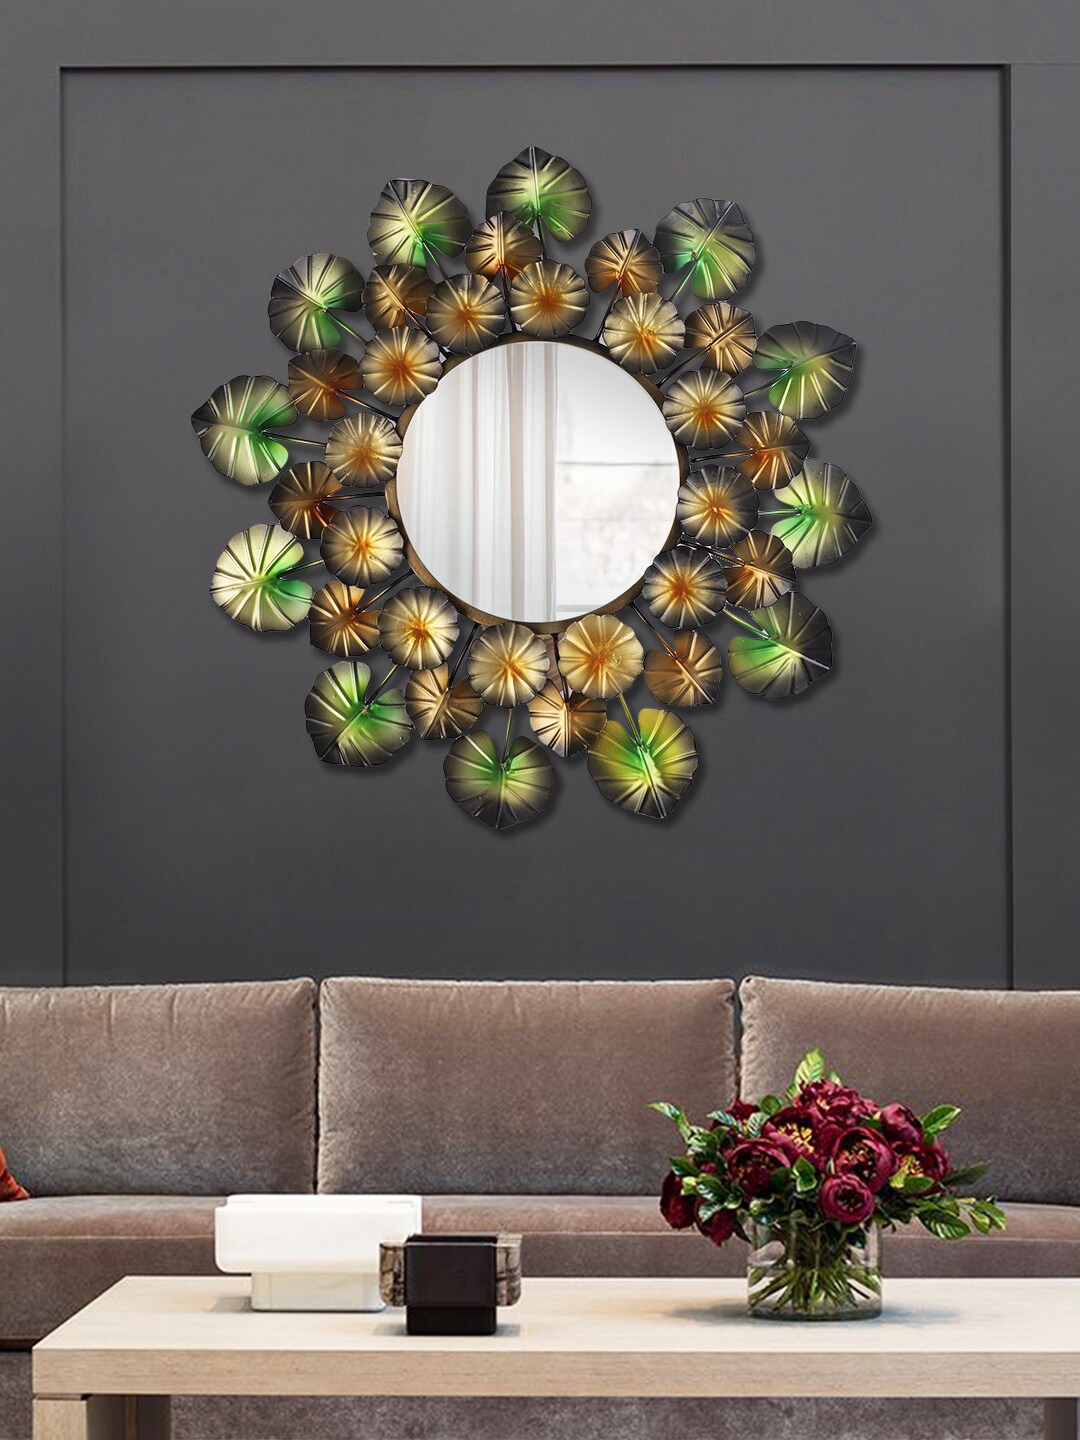 Aapno Rajasthan Gold-Toned Floral Design Round Mirror Price in India